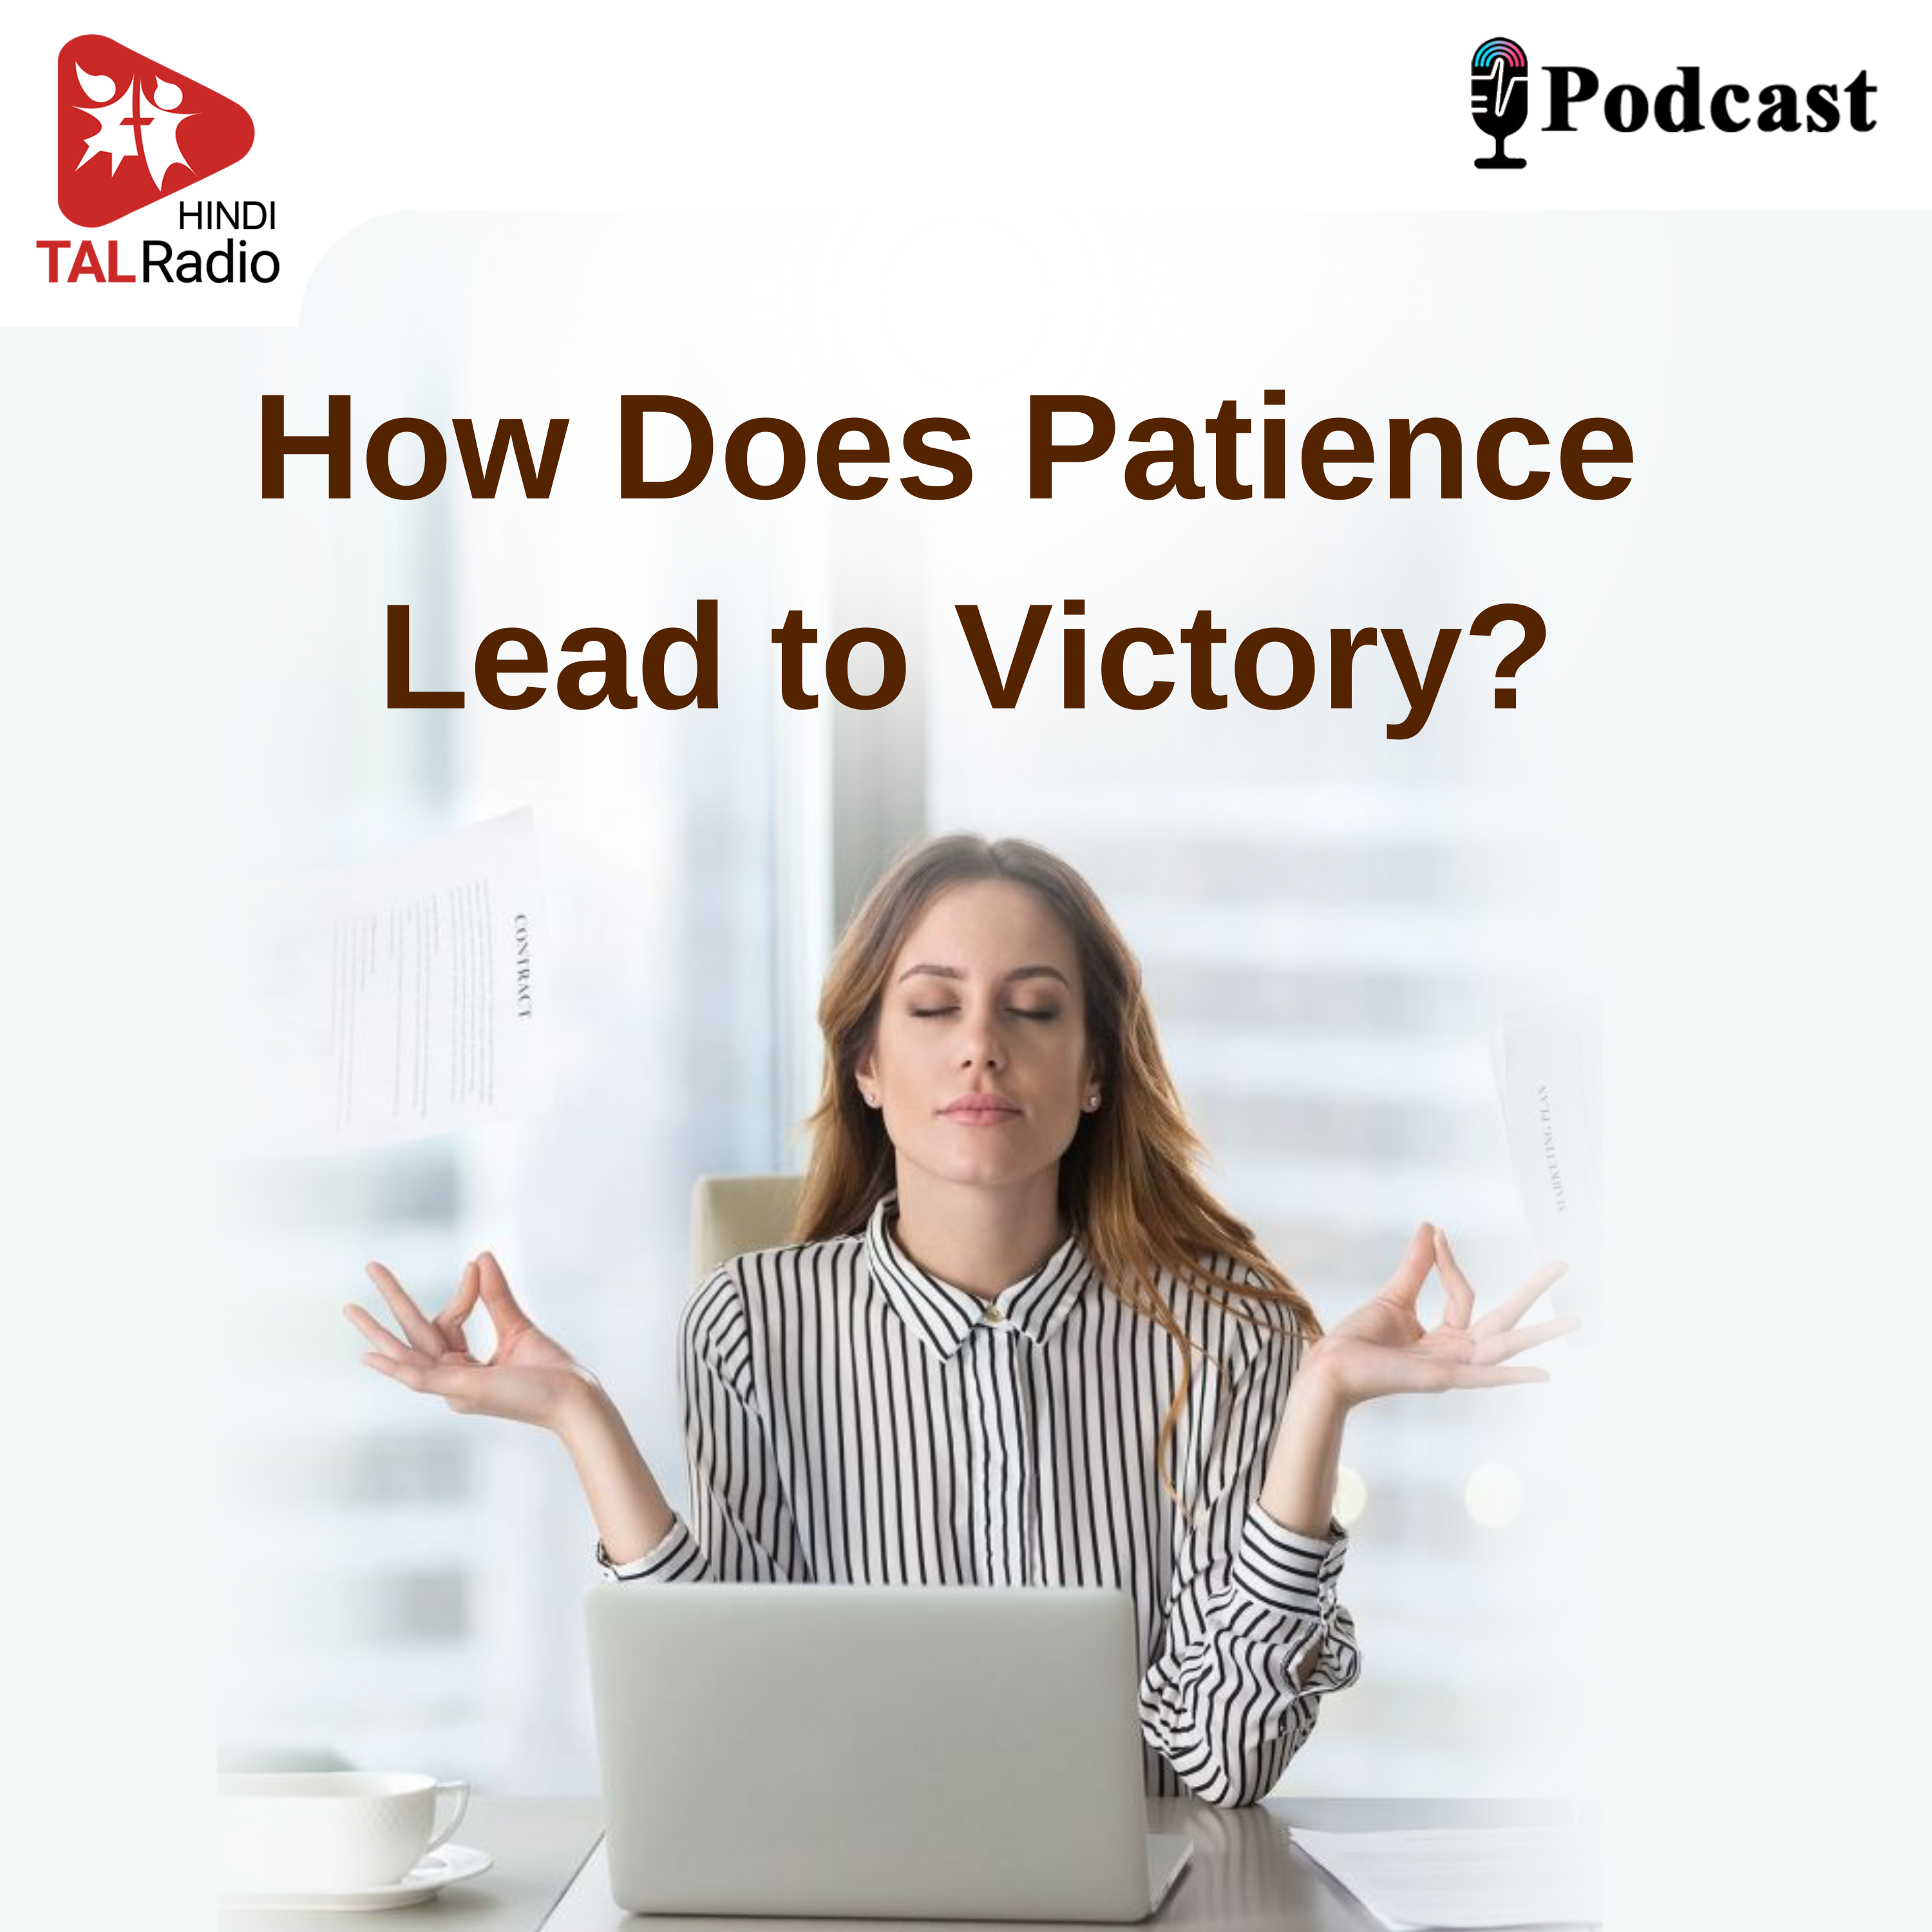 How Does Patience Lead to Victory